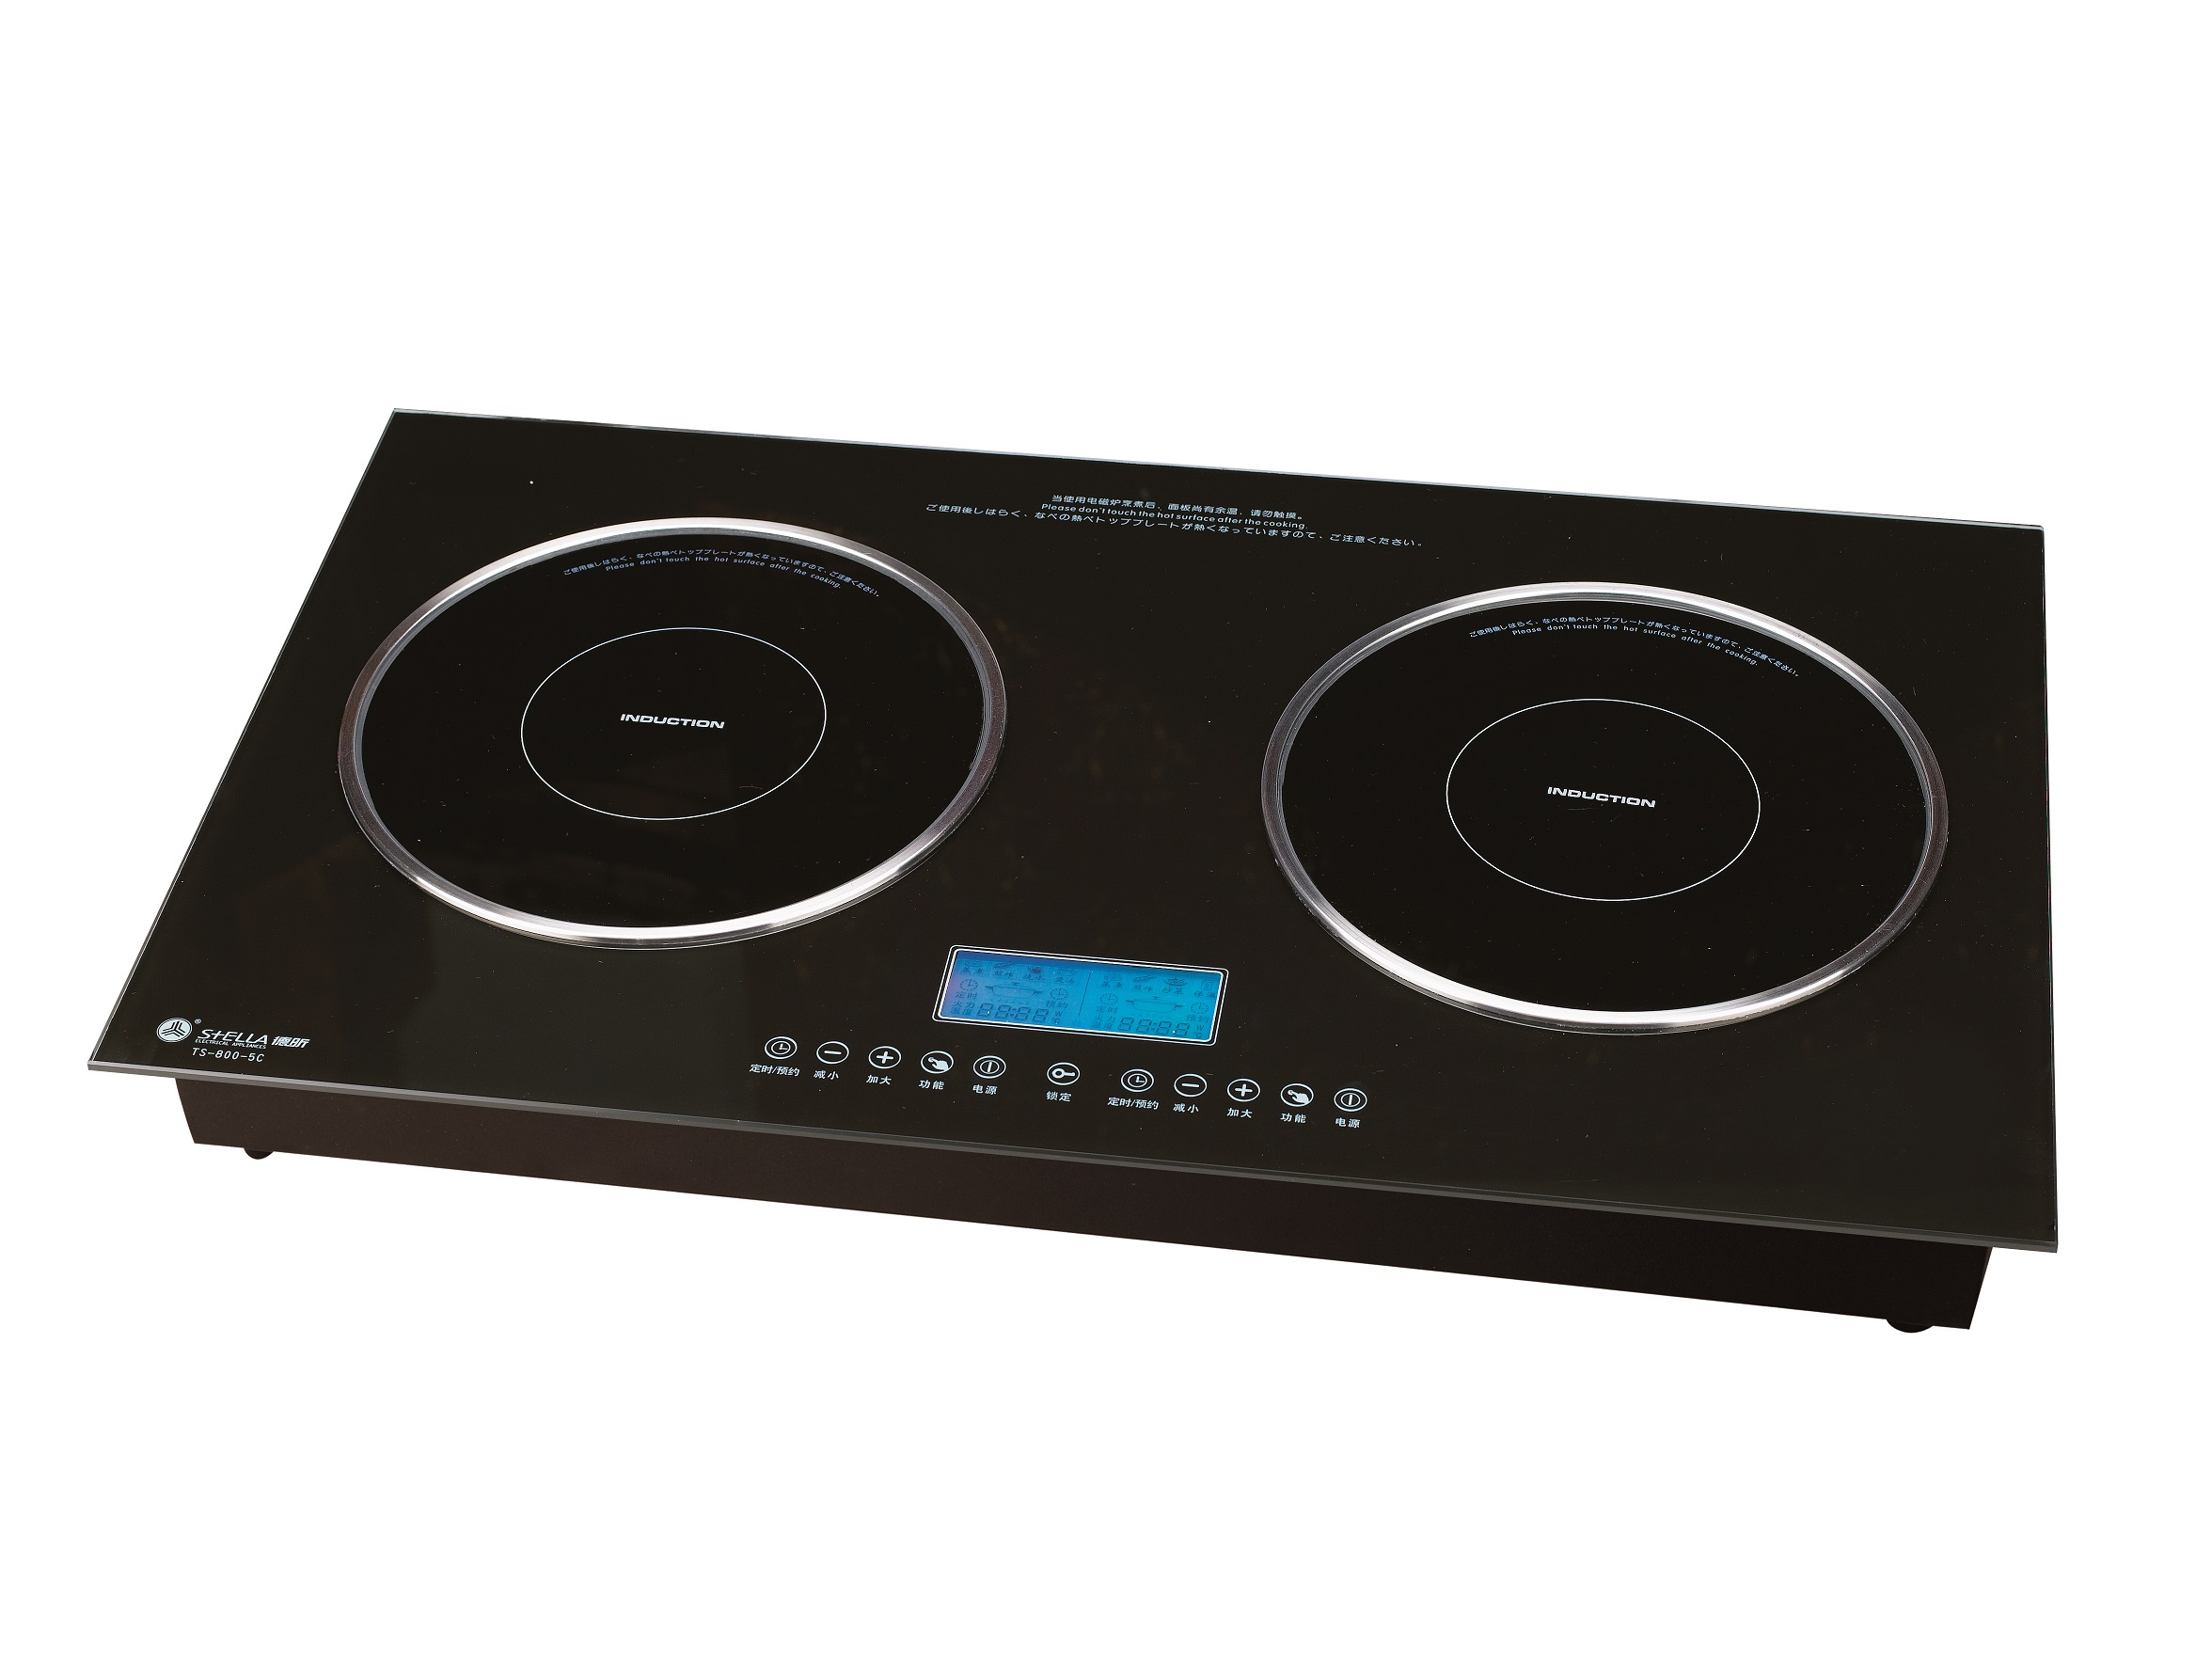 Microwave Cookware Induction Cooker Double Burners Hotpot ,3400W,Induction Cooker (Bottom Exhaust)